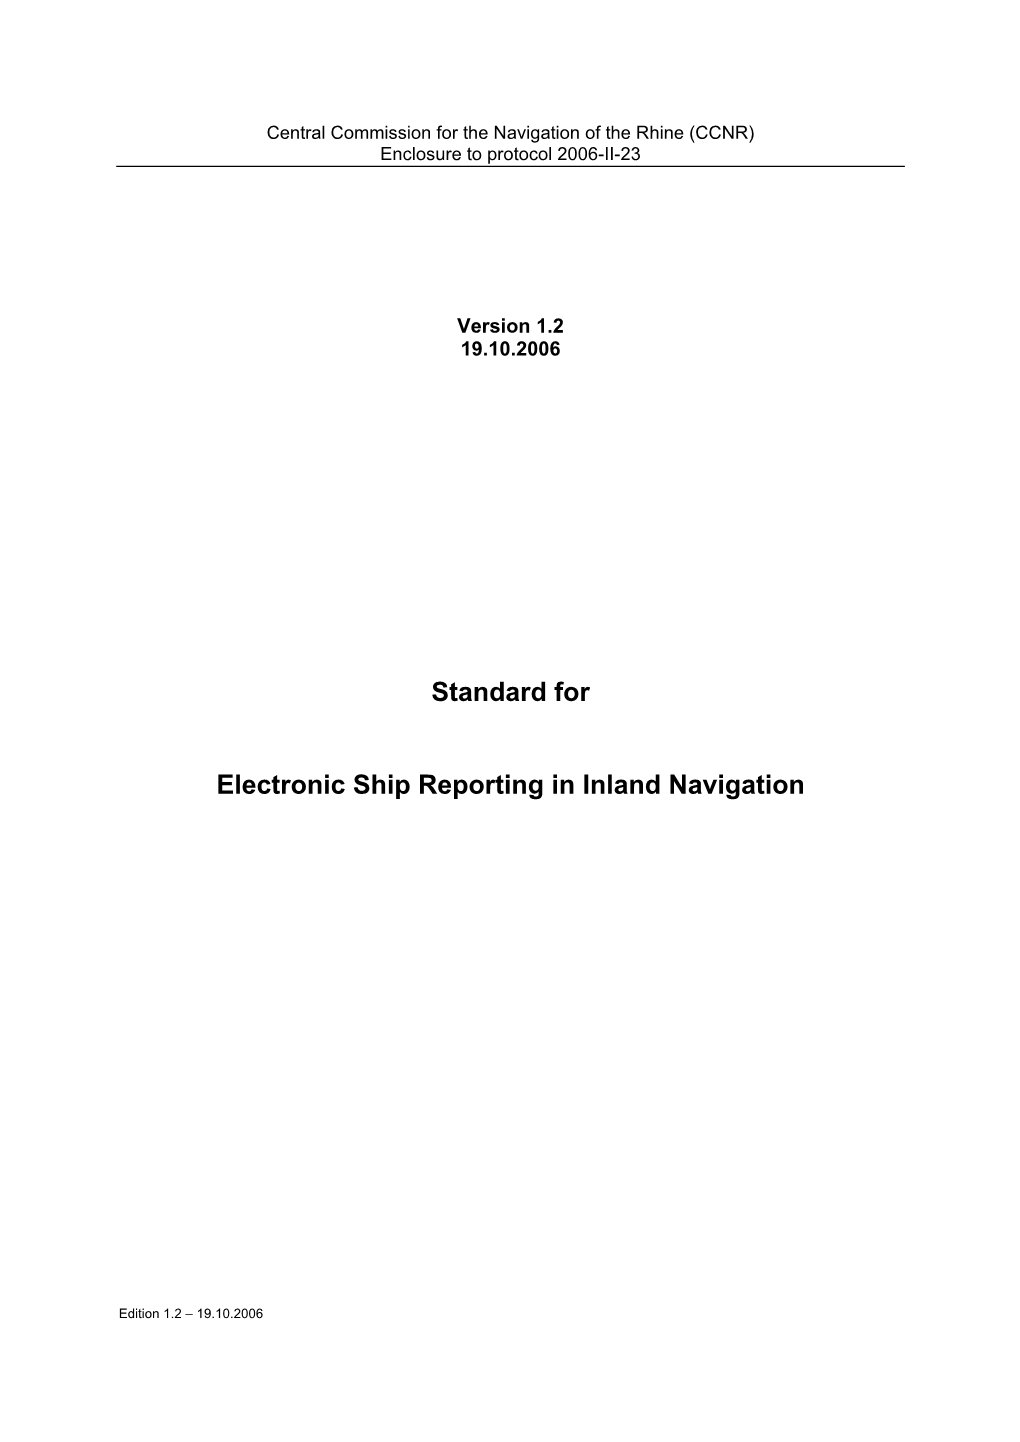 Standard for Electronic Ship Reporting in Inland Navigation